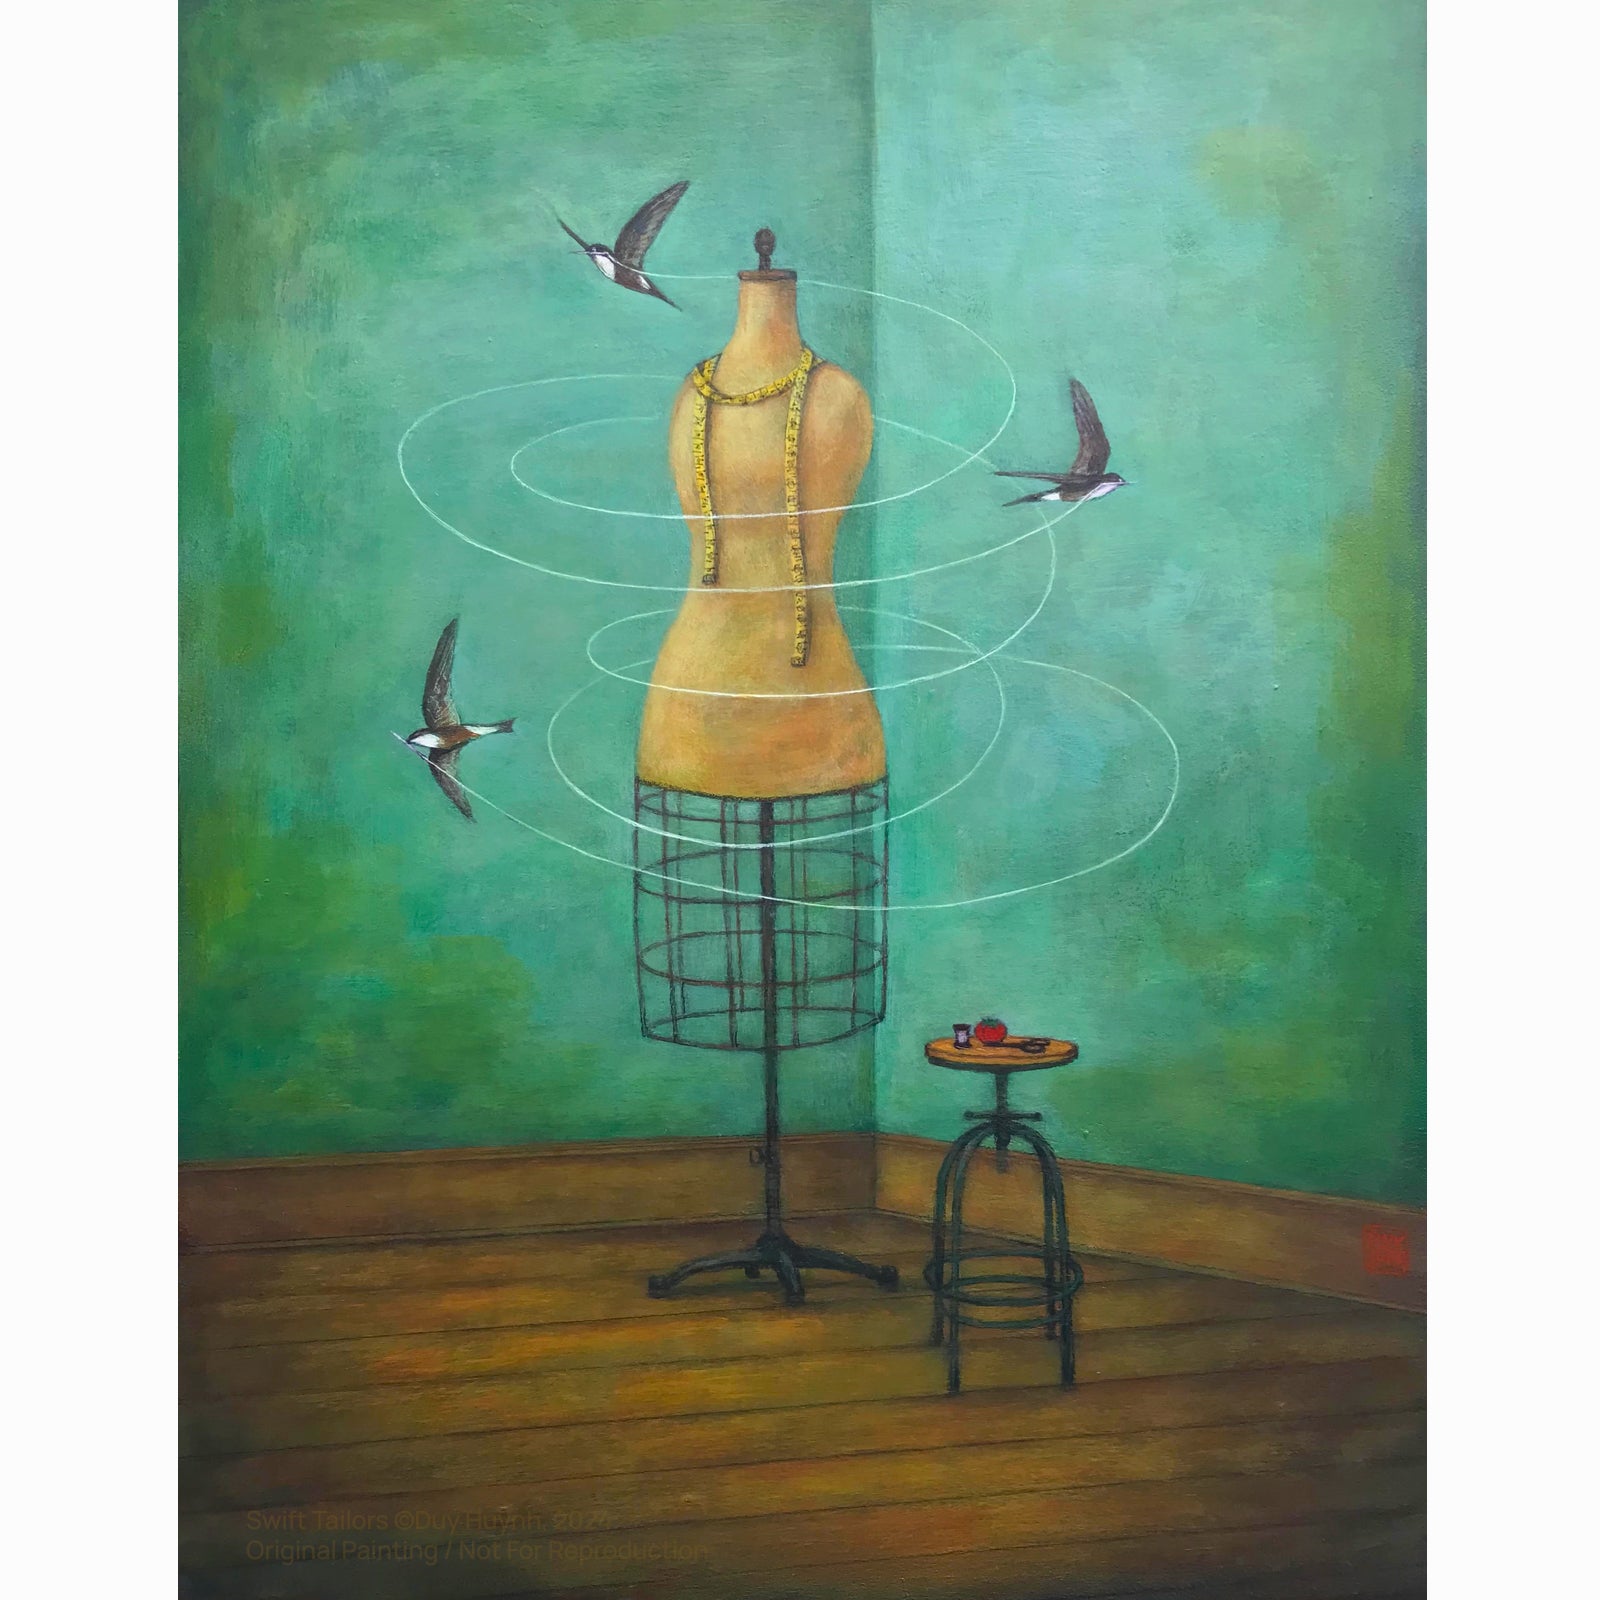 Artist Duy Huynh 's painting called "Swift Tailors". Three white-throated needletail swifts circle around a vintage mannequin with threads. A tape measurer is draped on the mannequin and other sewing notions sit on a stool below. Available at Lark & Key, Charlotte NC.